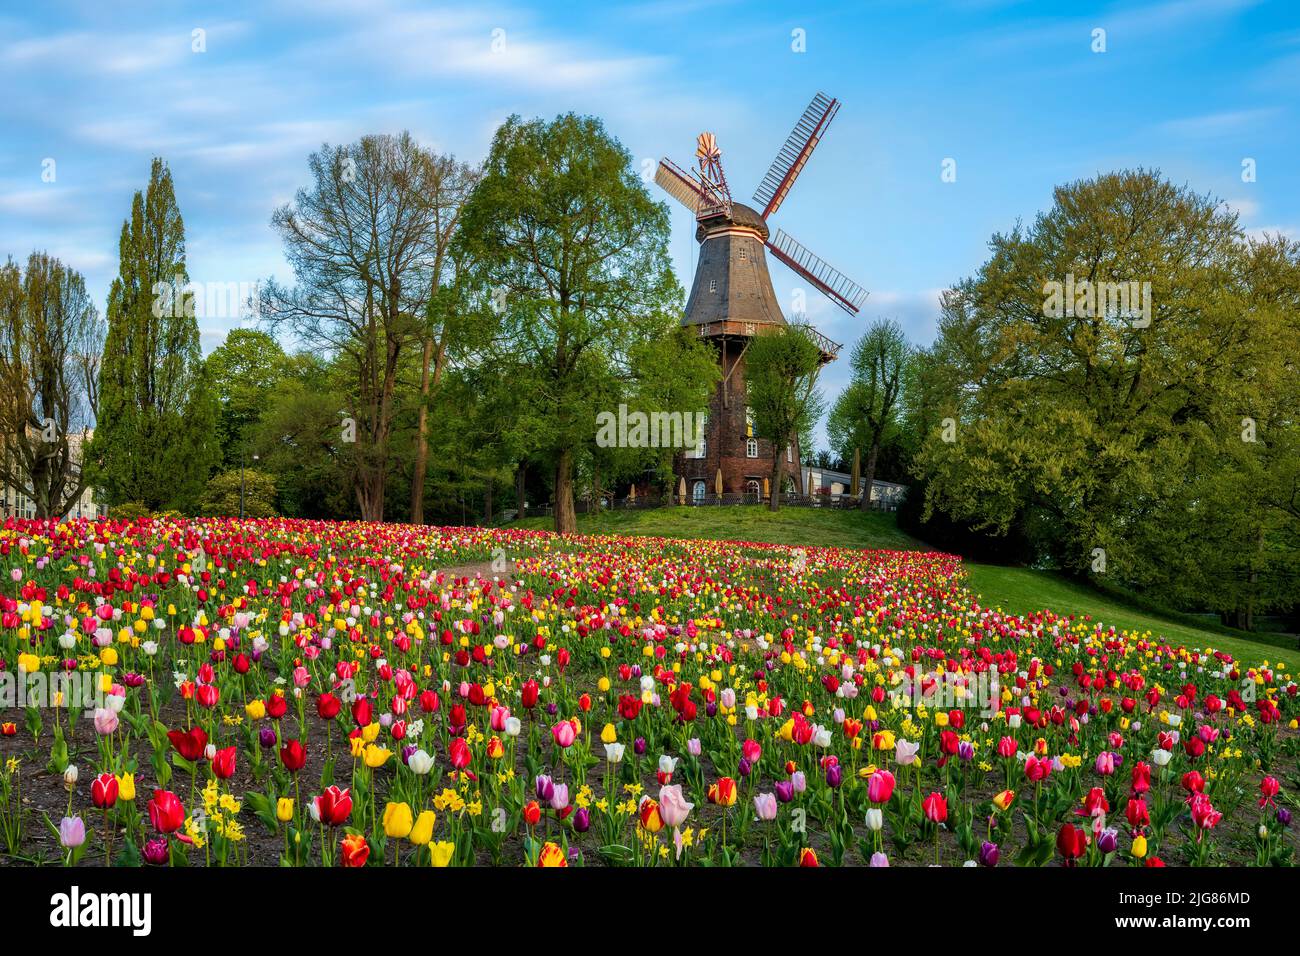 Tulips in front of historic windmill during spring in Bremen, Germany Stock Photo